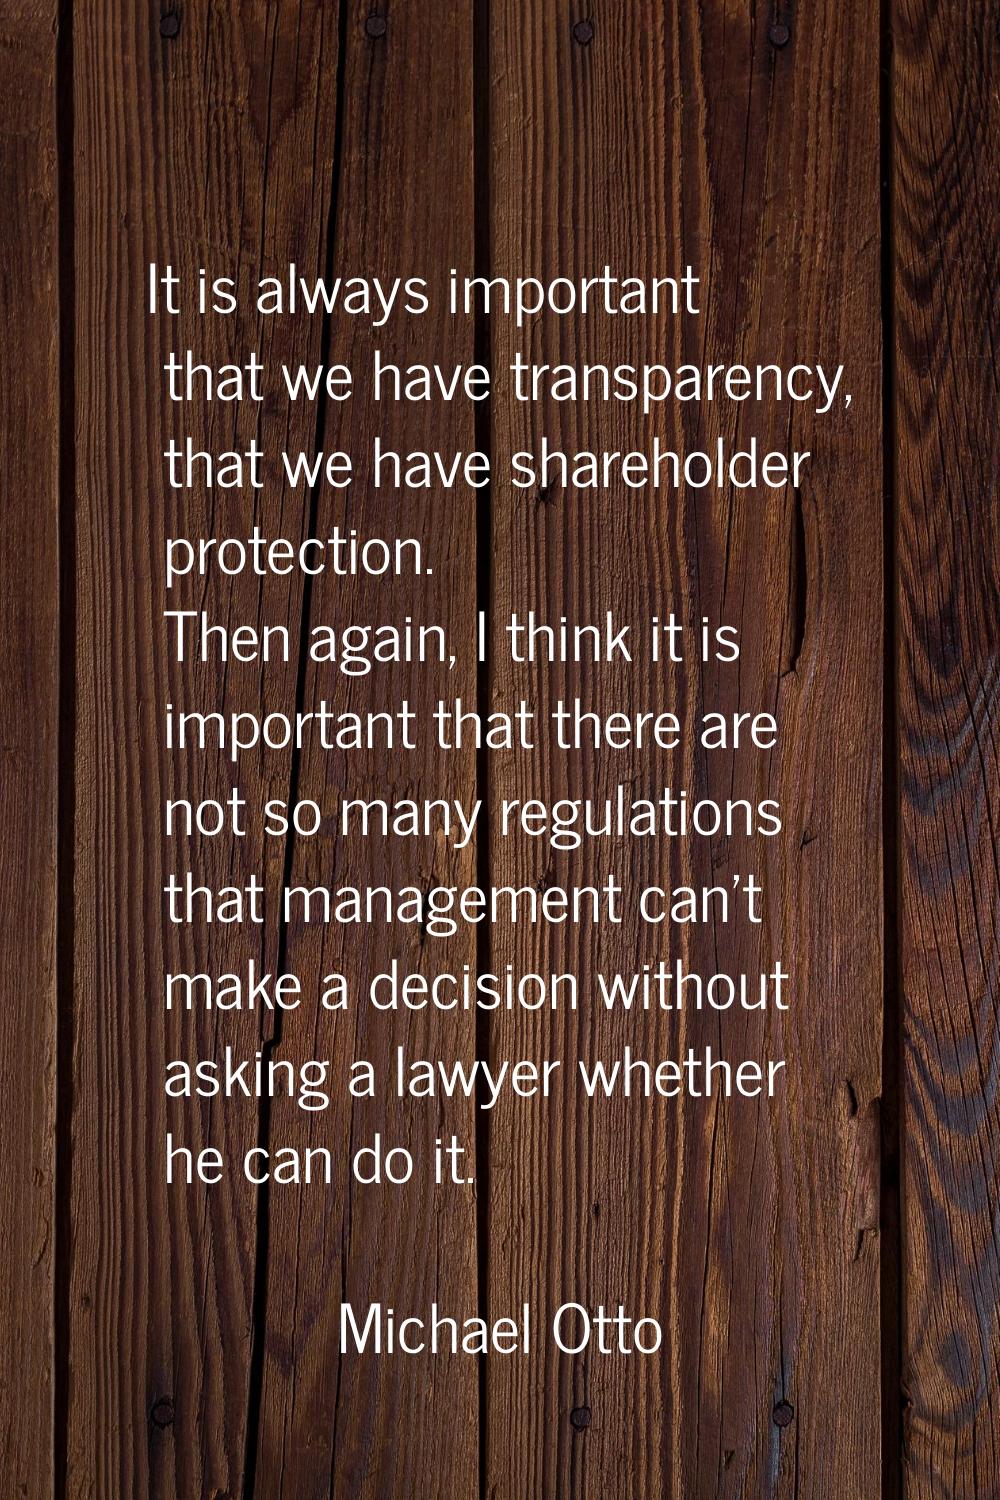 It is always important that we have transparency, that we have shareholder protection. Then again, 